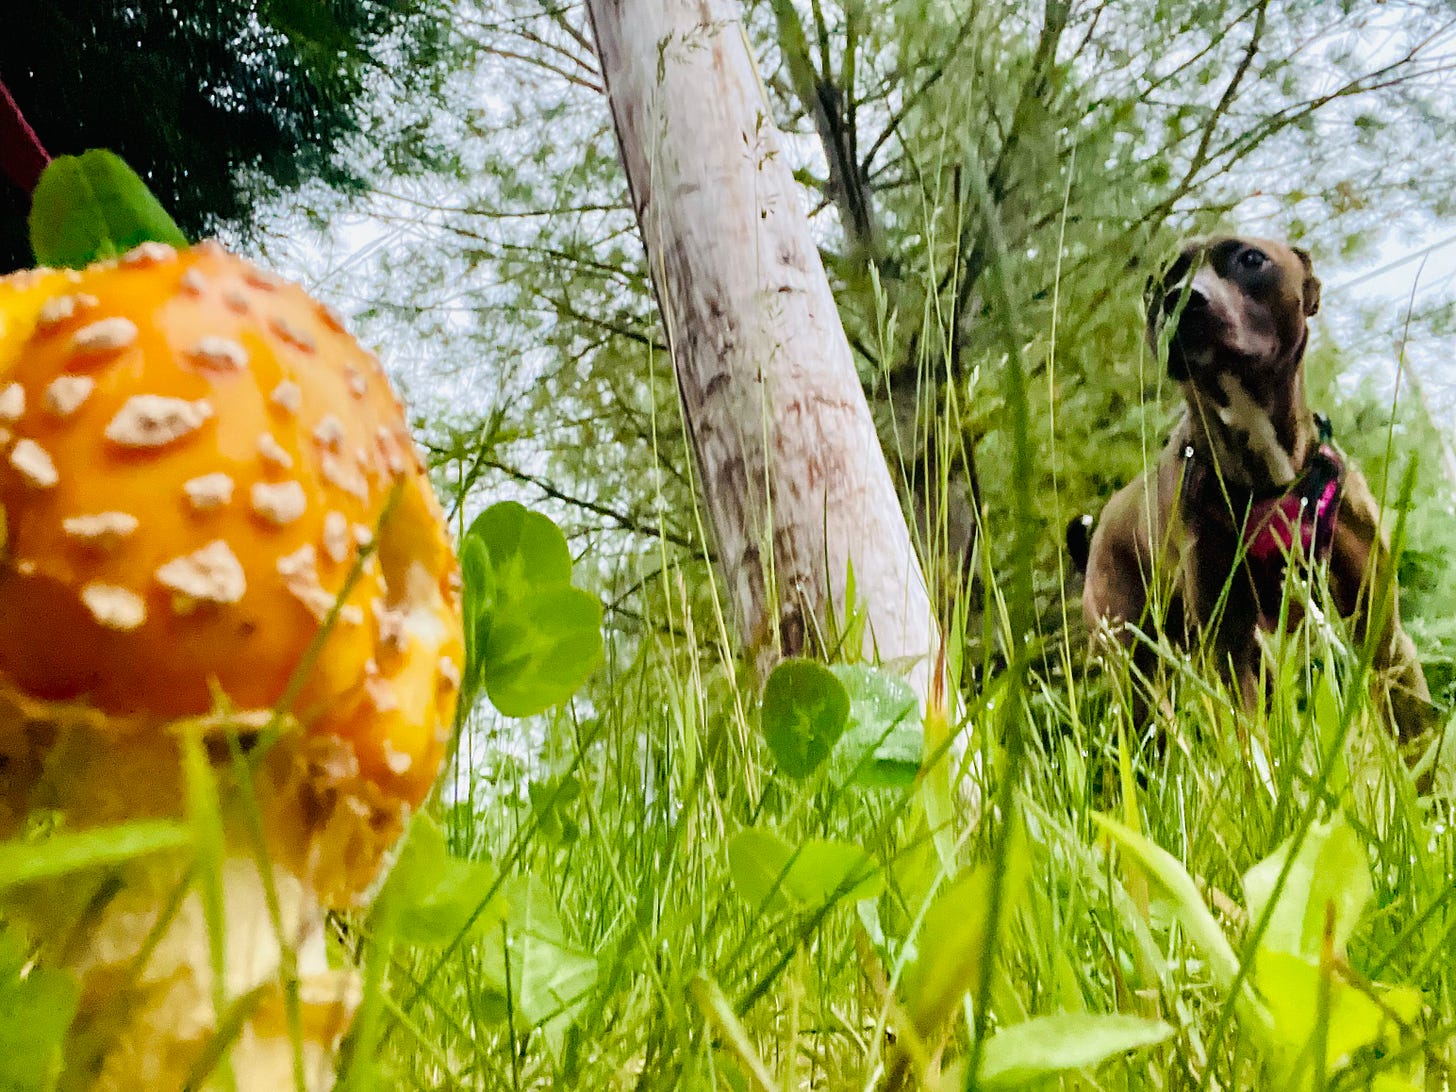 mushroom, grass, dog, from the angle of the grass